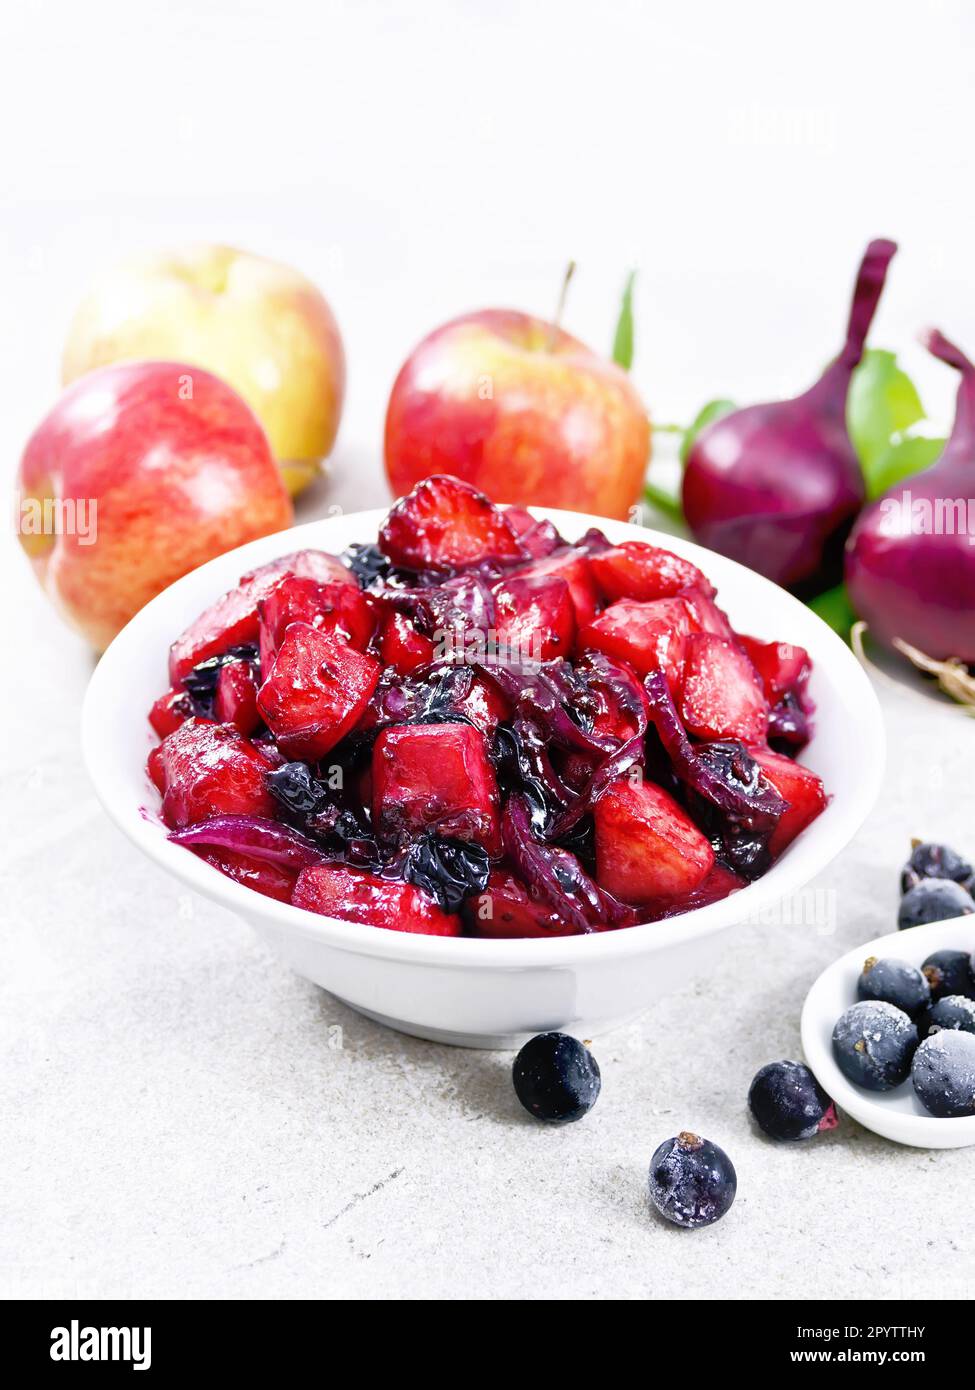 Chutney of apple, red onion and blackcurrant in a bowl against a granit table Stock Photo